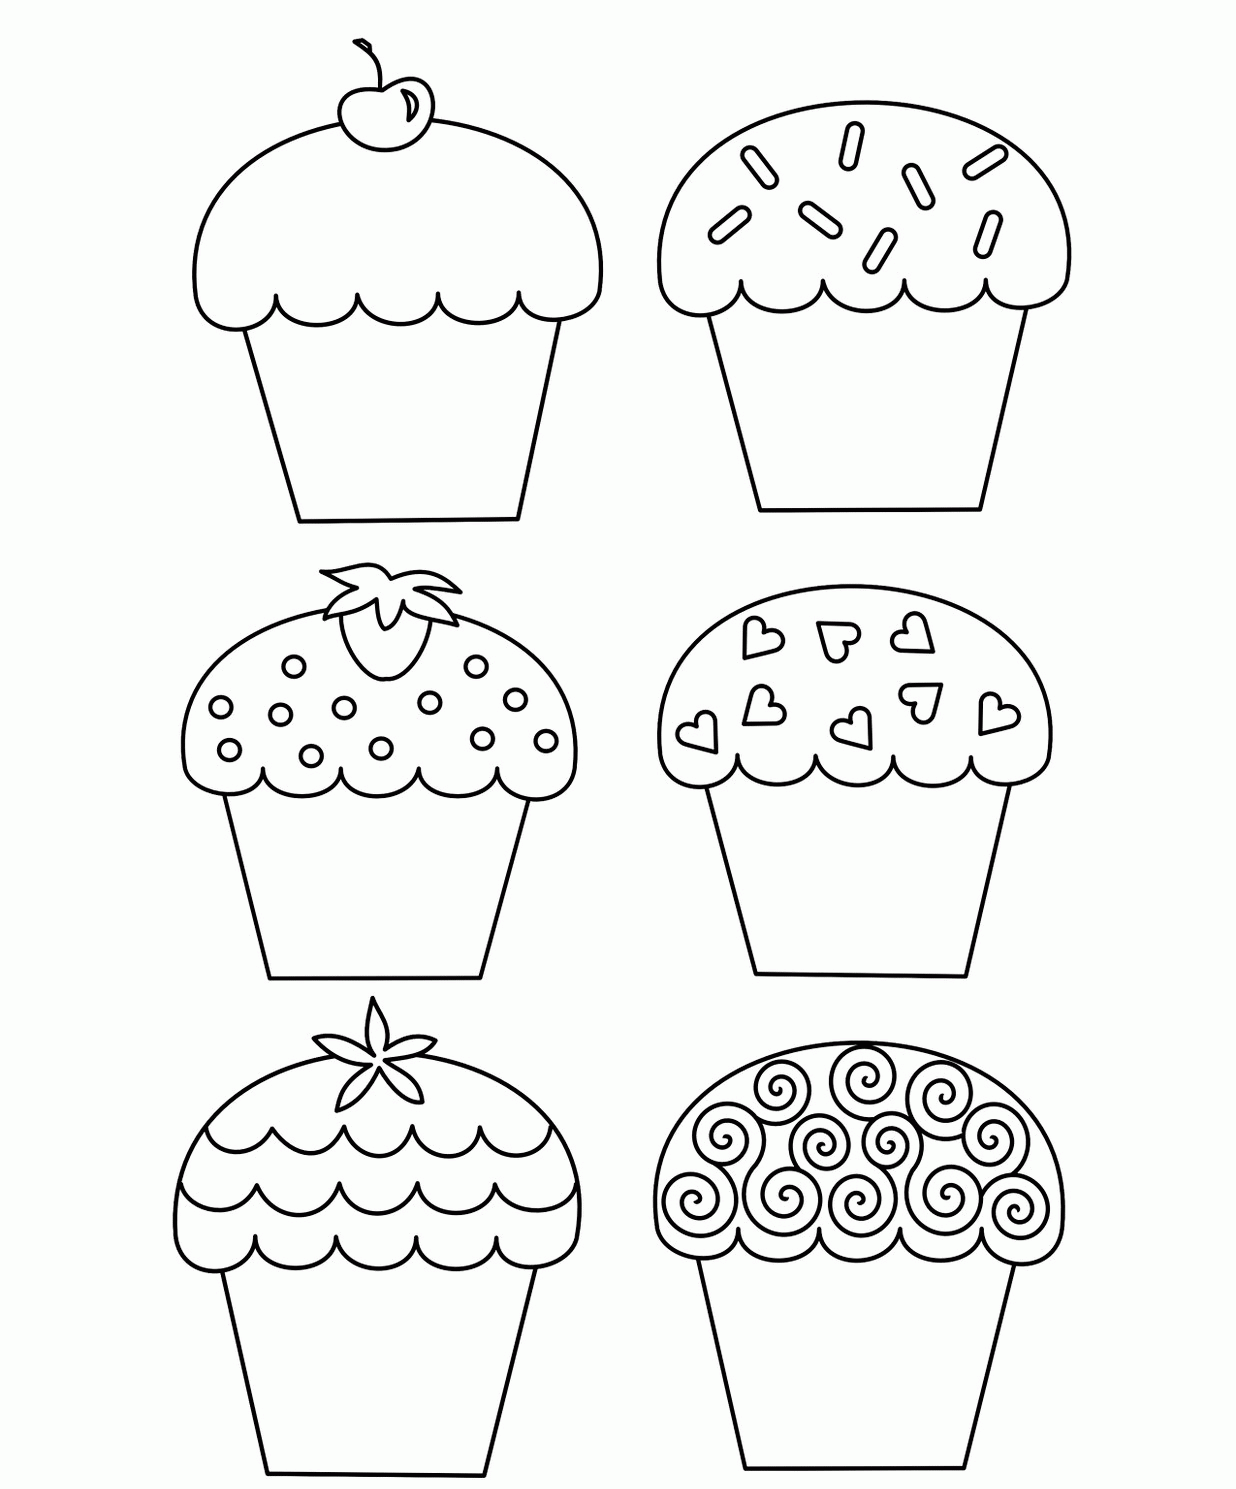 Cup Cake Coloring Pages   Coloring Cool